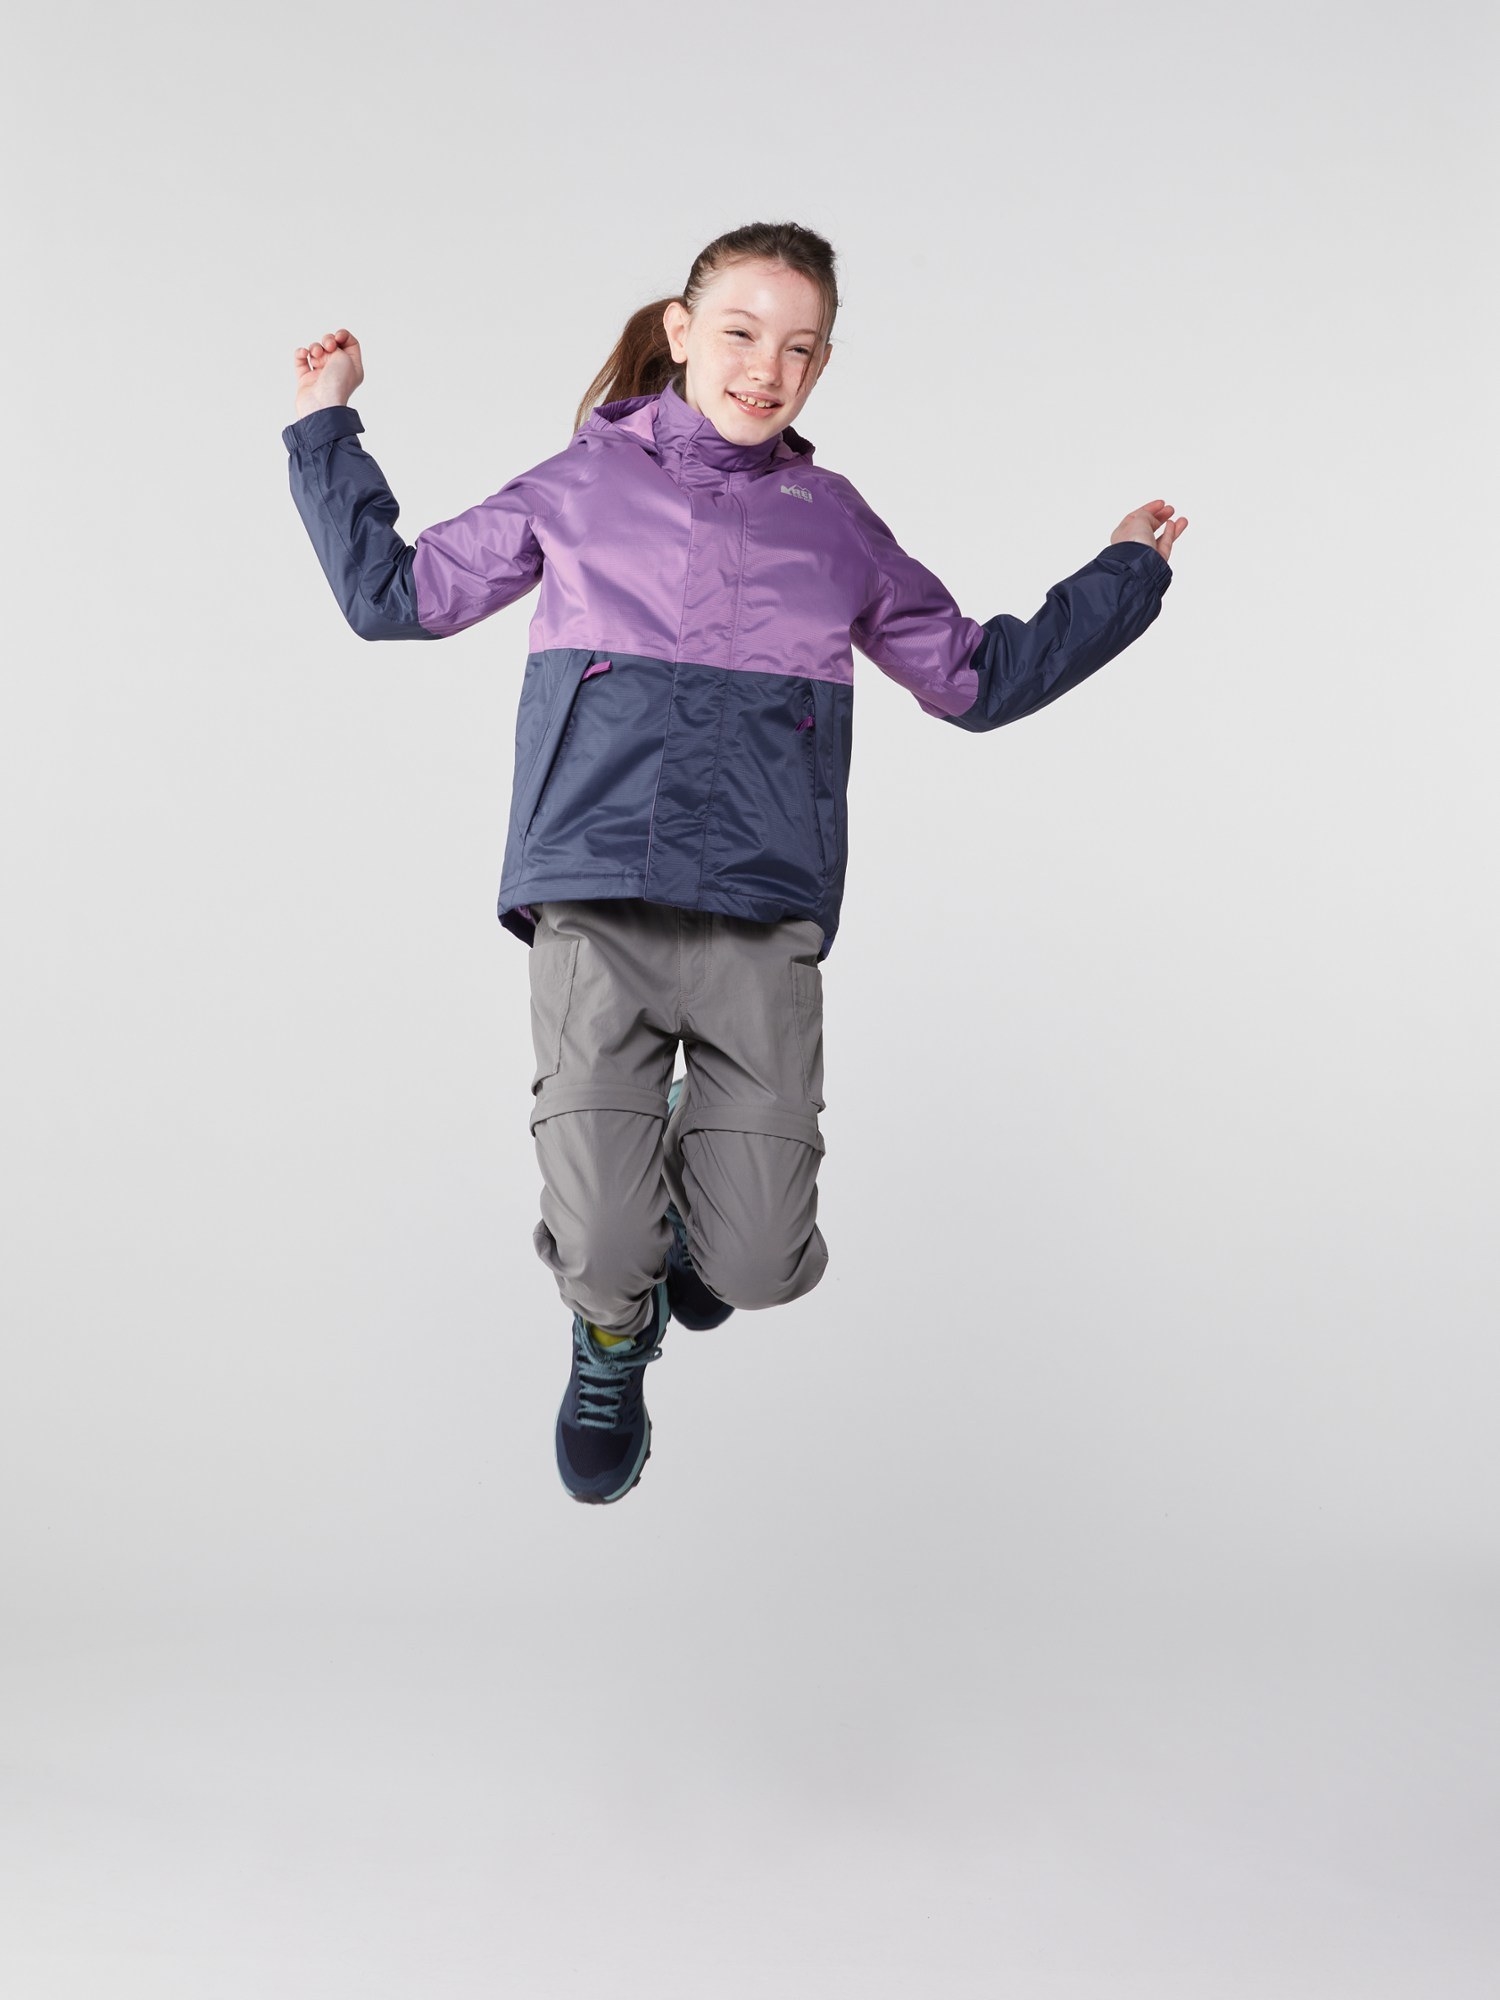 child model jumping in the purple raincoat